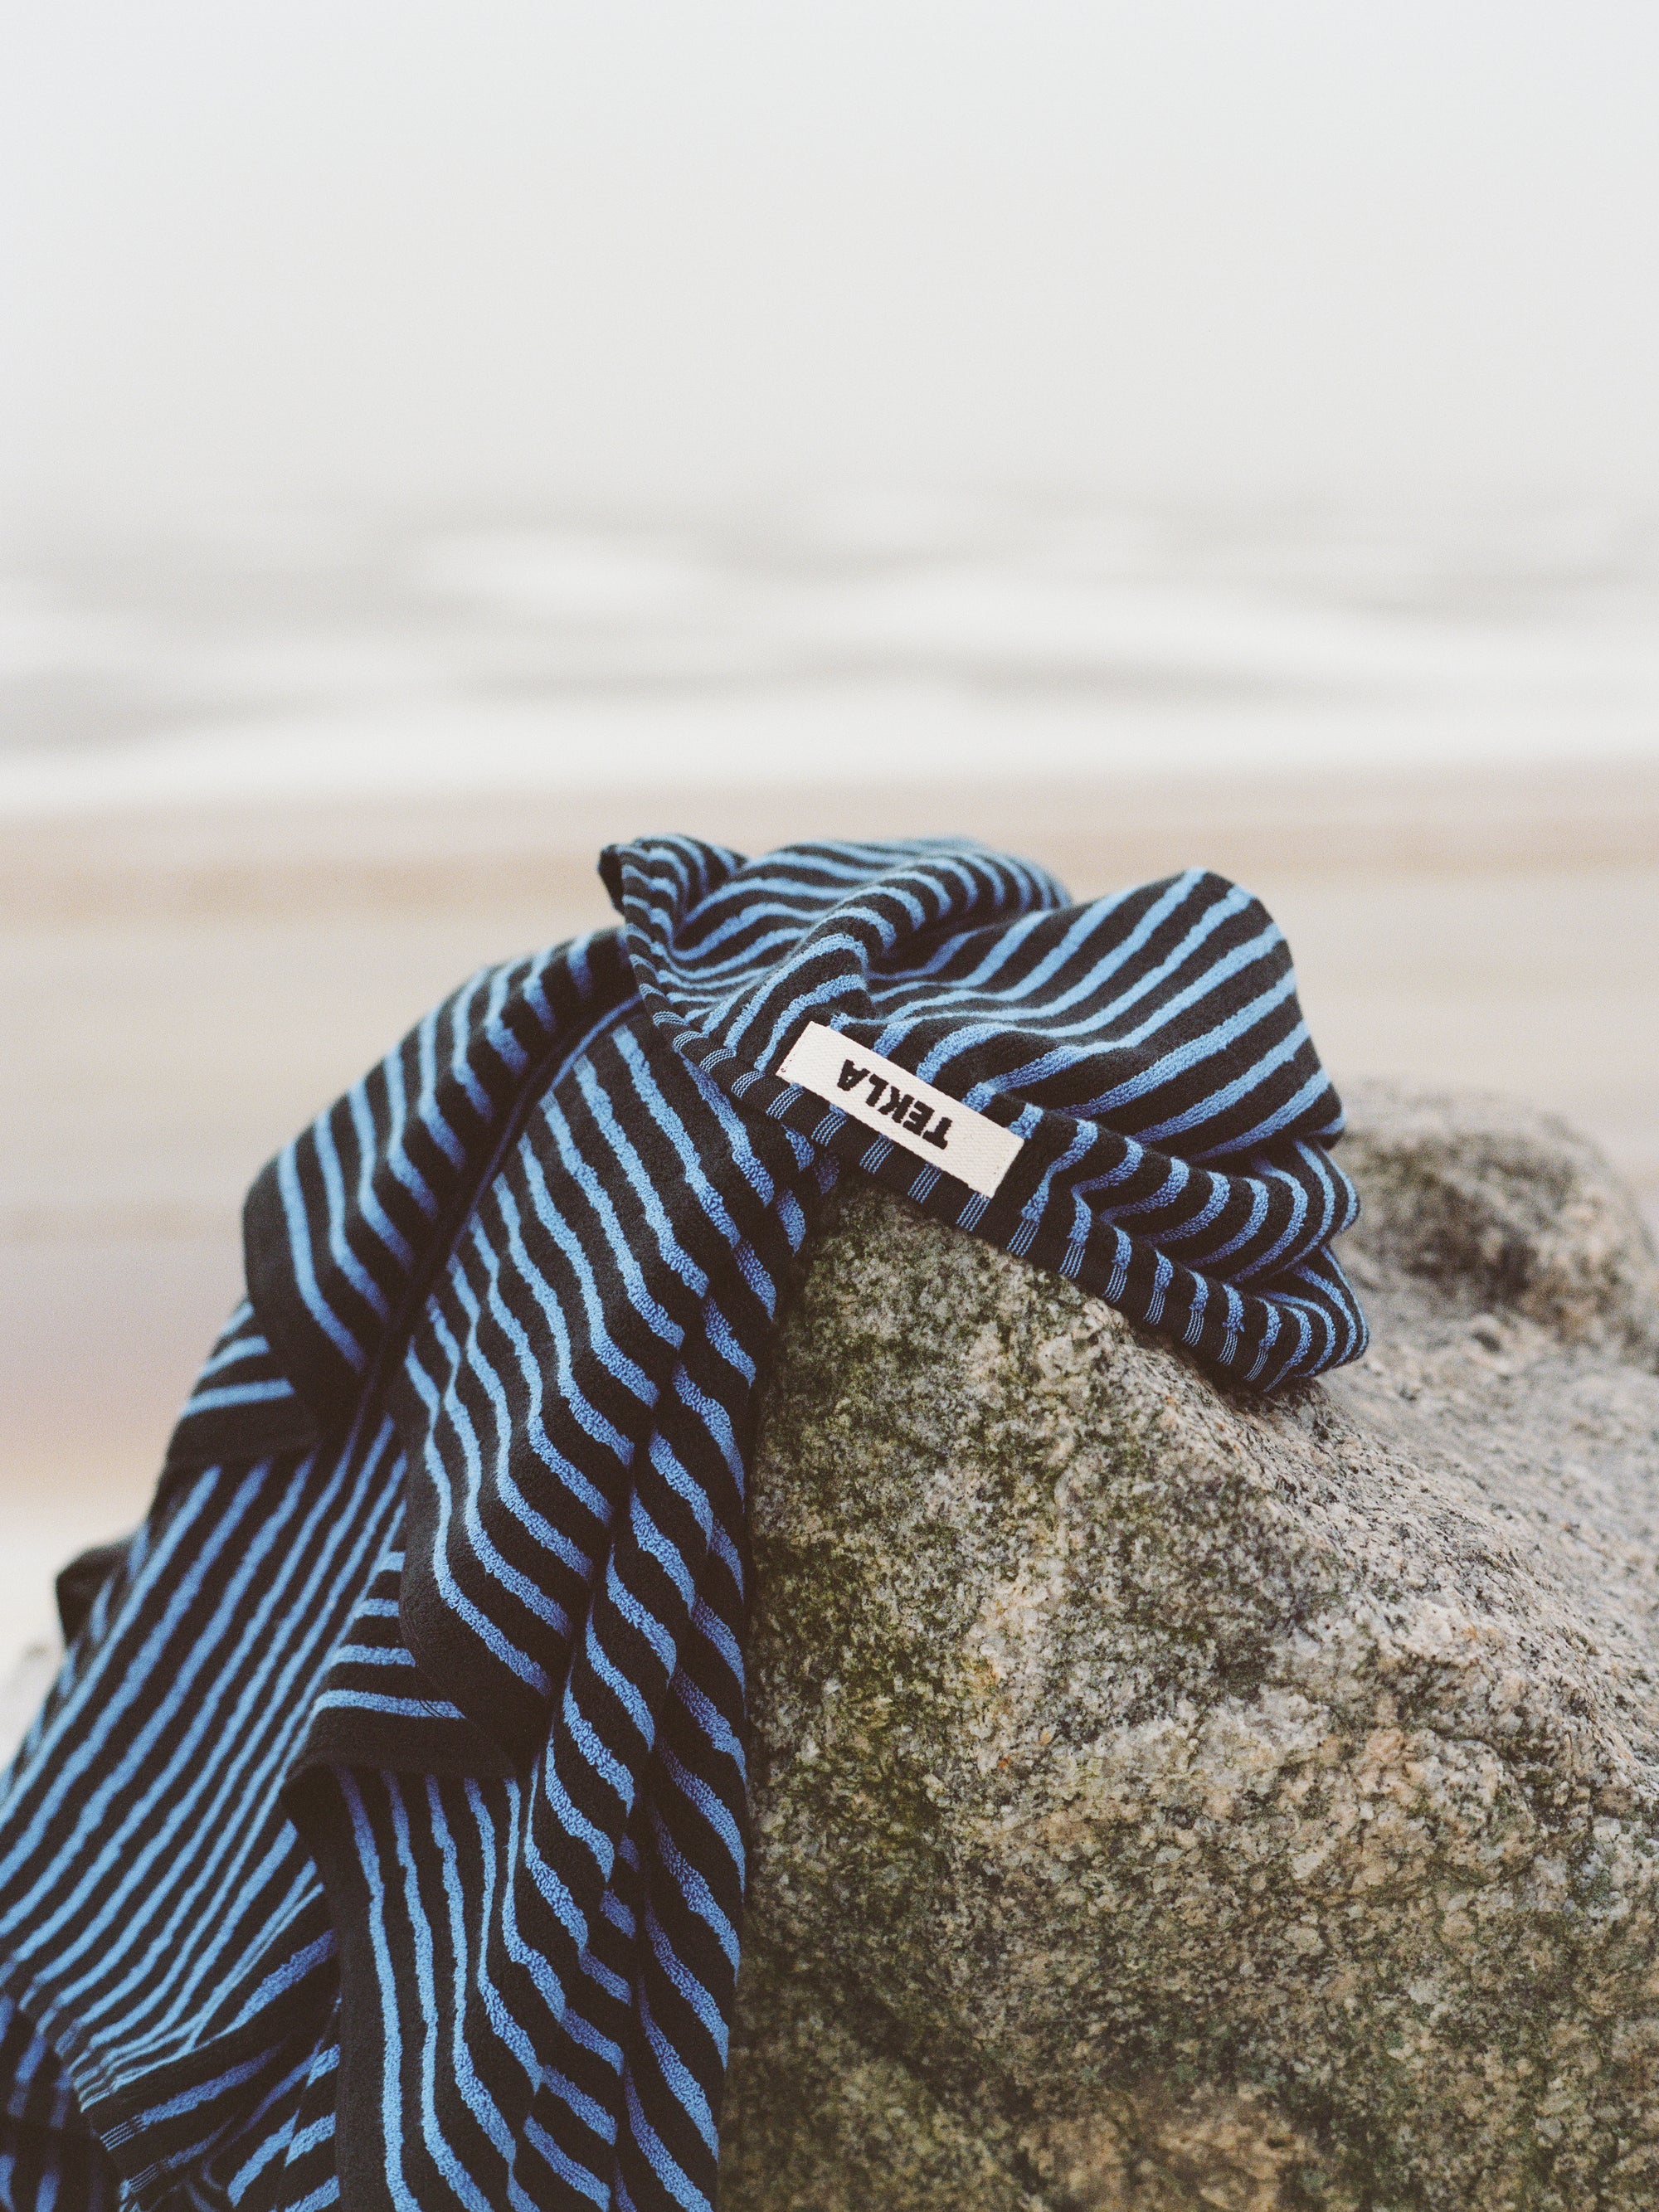 Organic Cotton Towels - Black and Blue